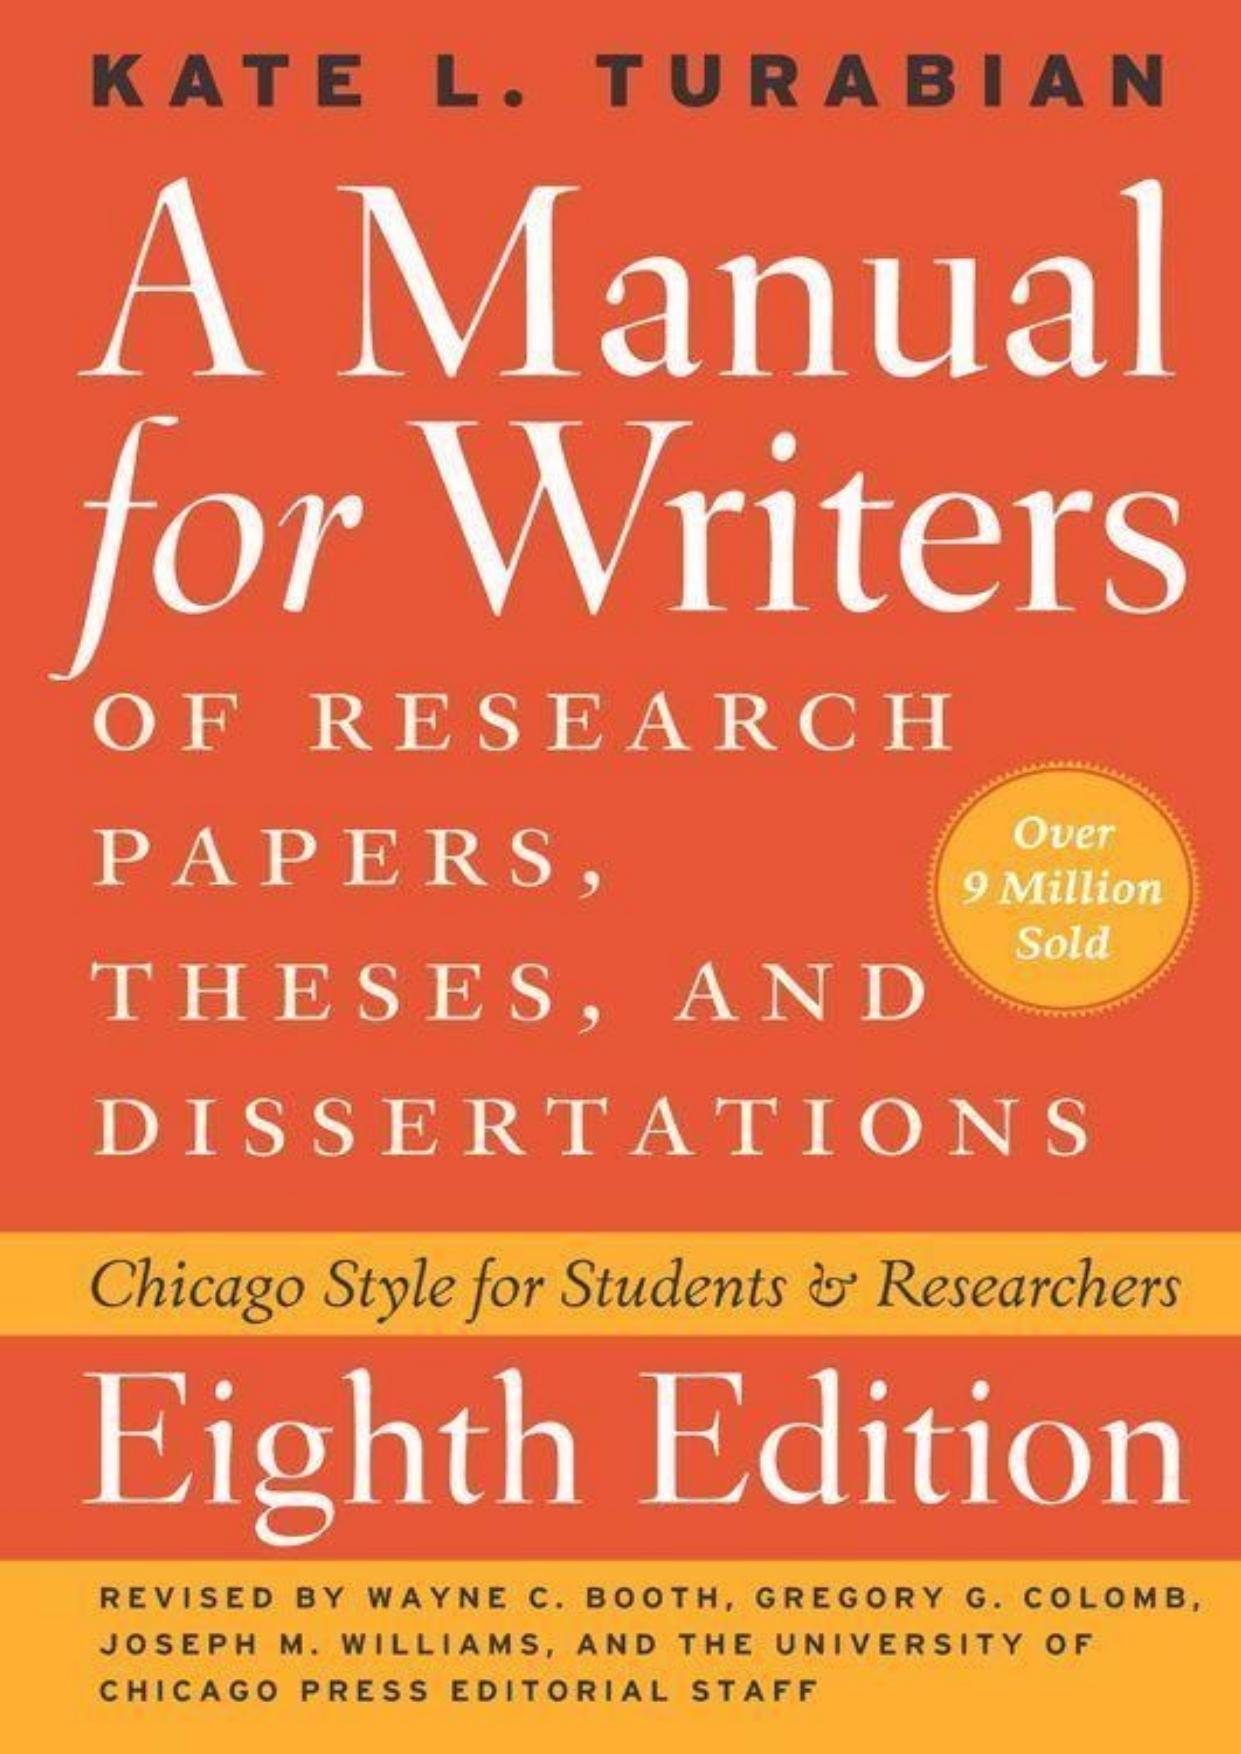 A Manual for Writers of Research Papers, Theses, and Dissertations, Eighth Edition: Chicago Style for Students and Researchers (Chicago Guides to Writing, Editing, and) by Kate L. Turabian